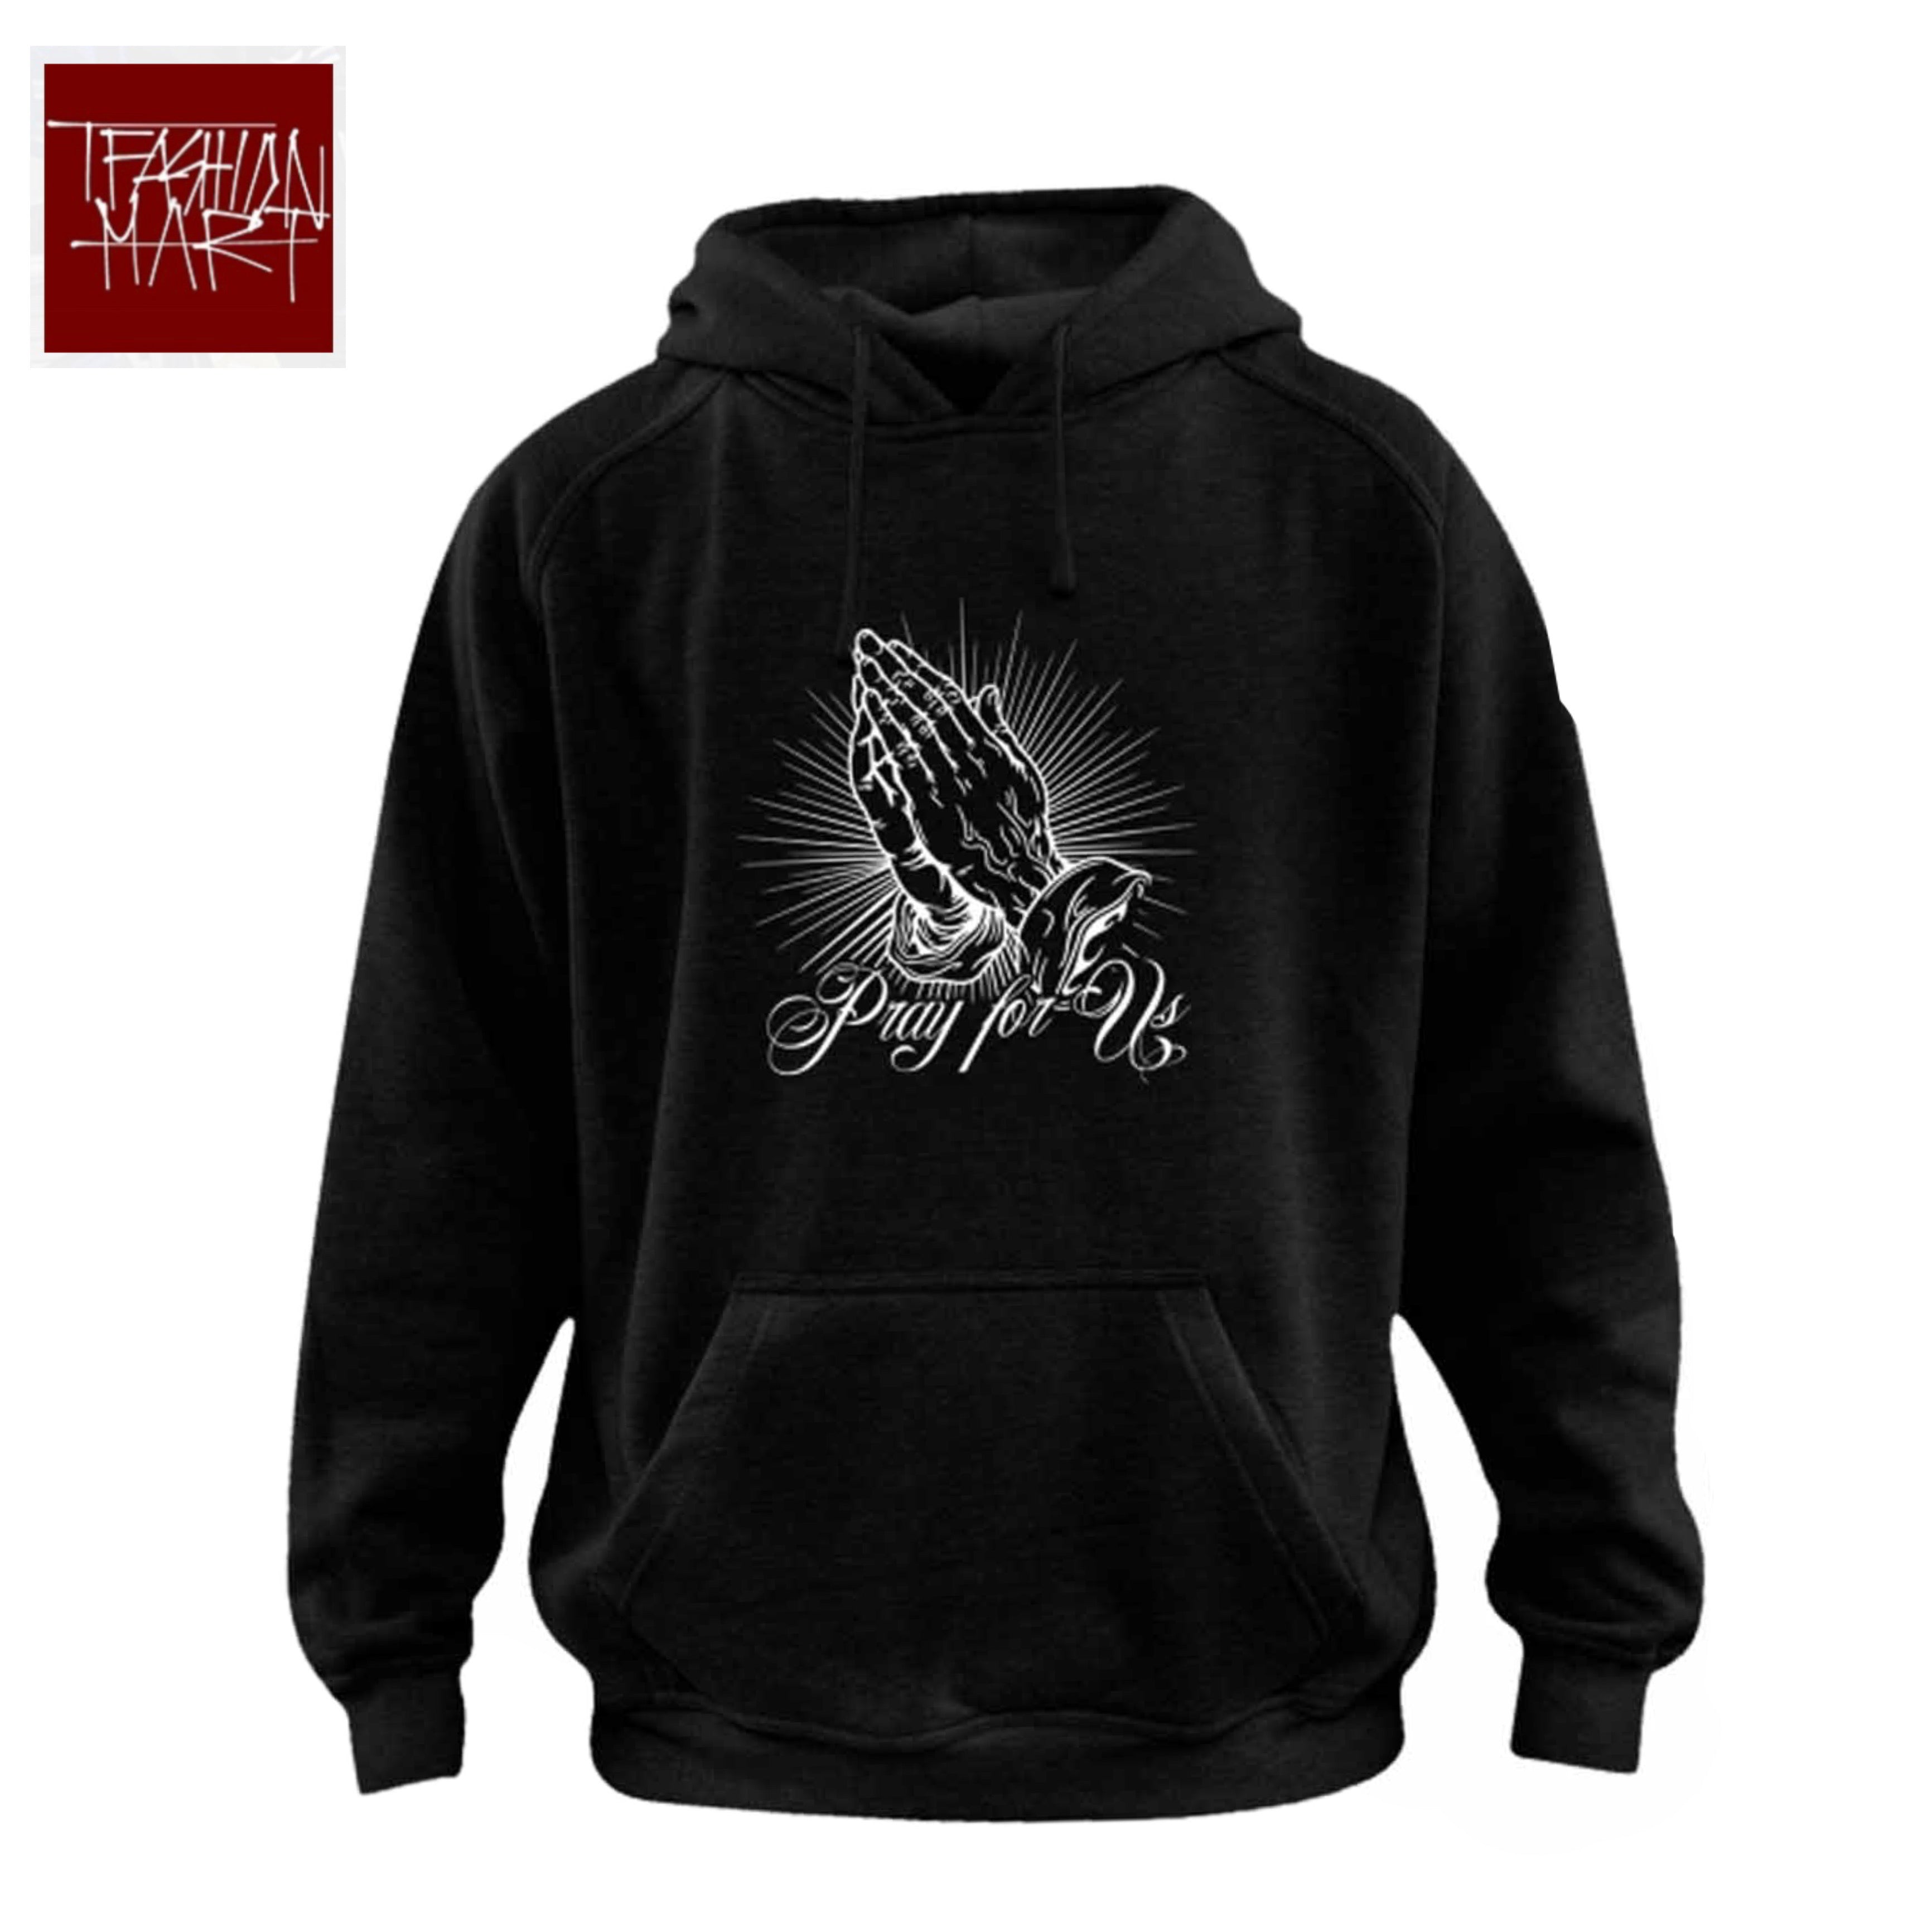 TFashion Graphic Hoodie - Forgive Me Mother